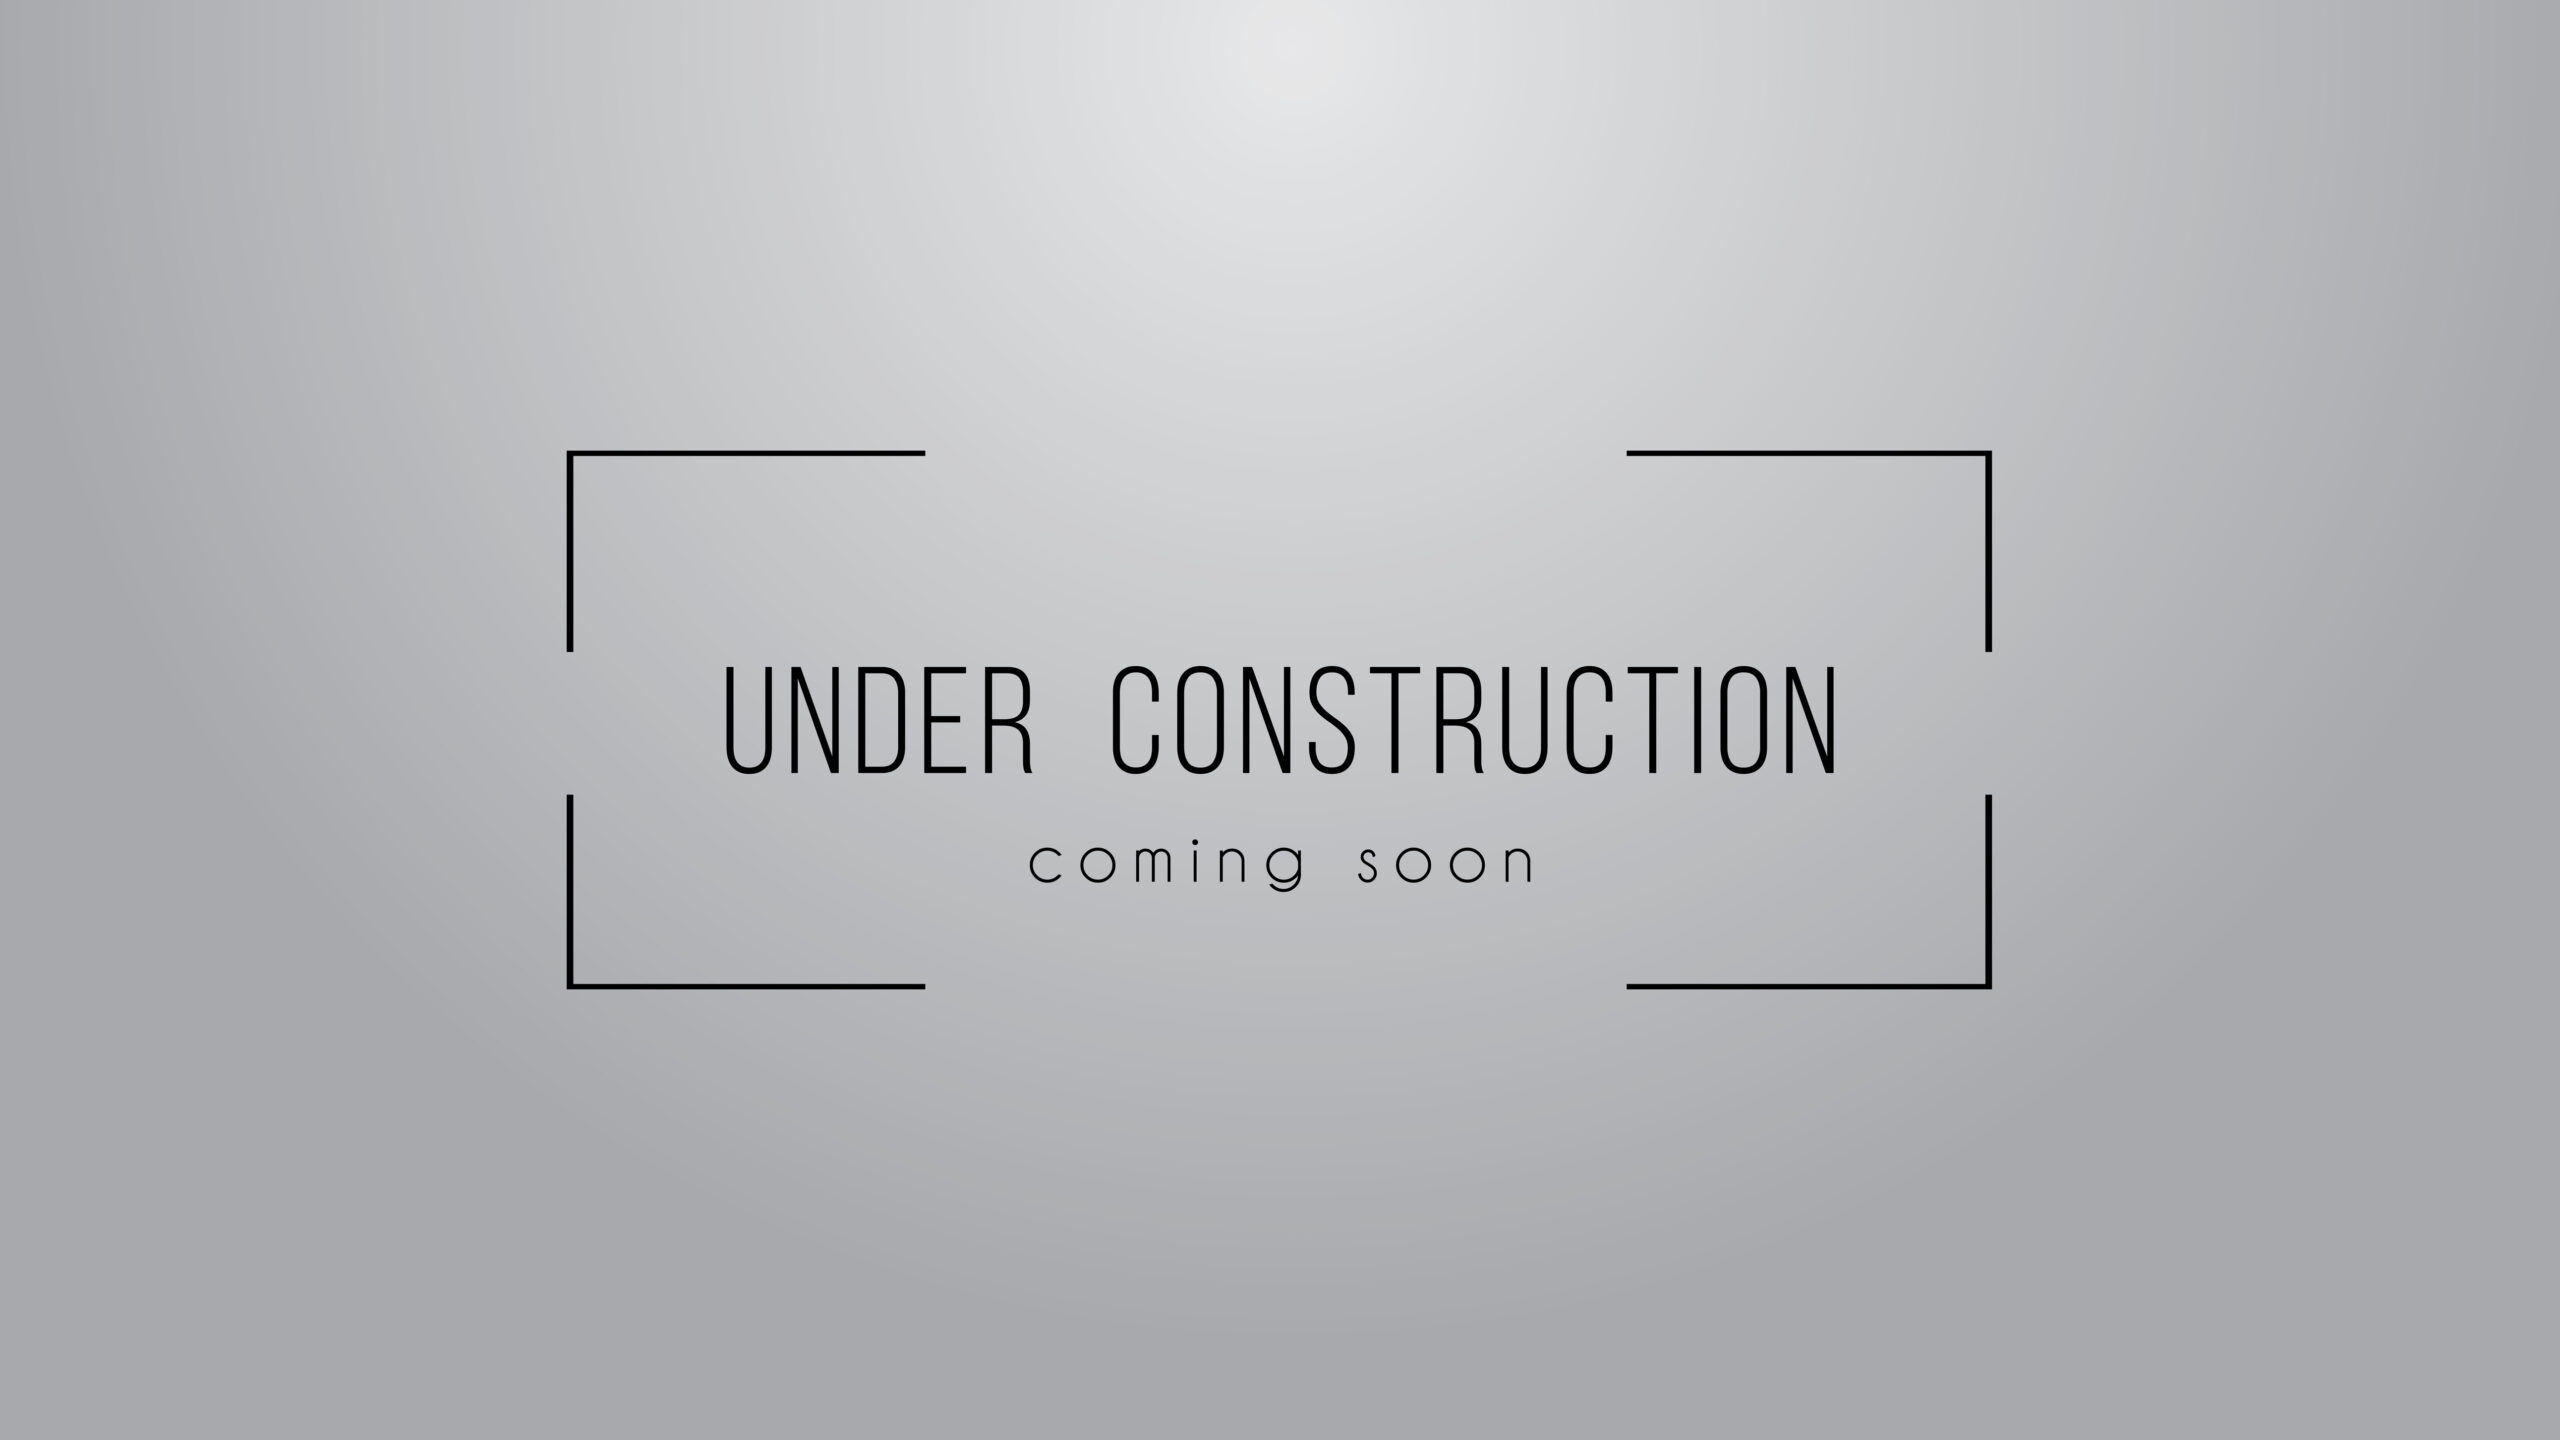 Under construction simple sign on grey background. Vector illustration.